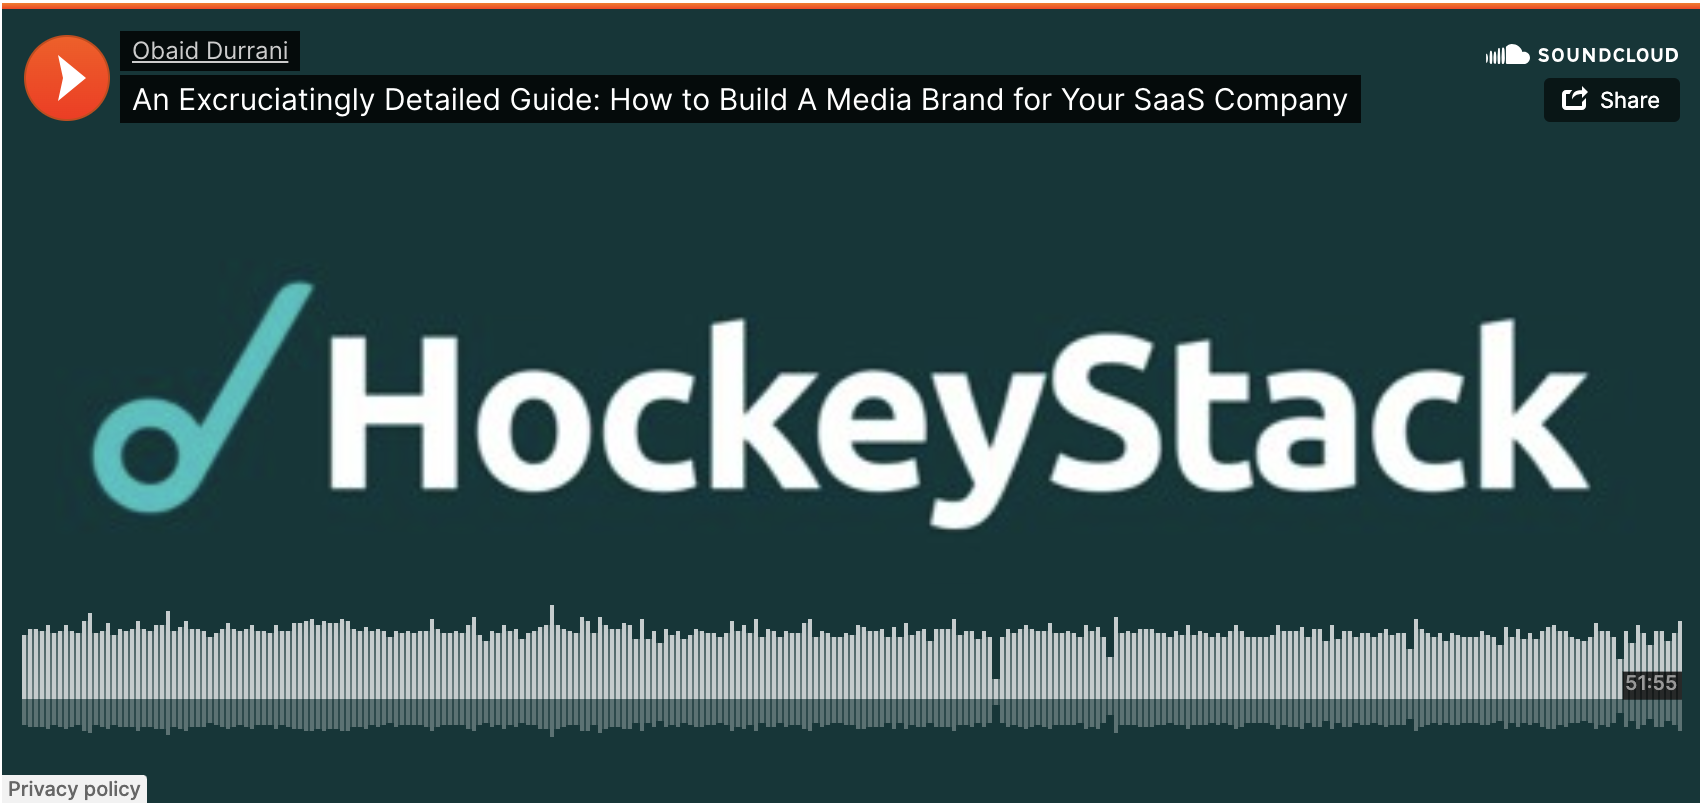 An Excruciatingly Detailed Guide: How to Build A Media Brand for Your SaaS Company